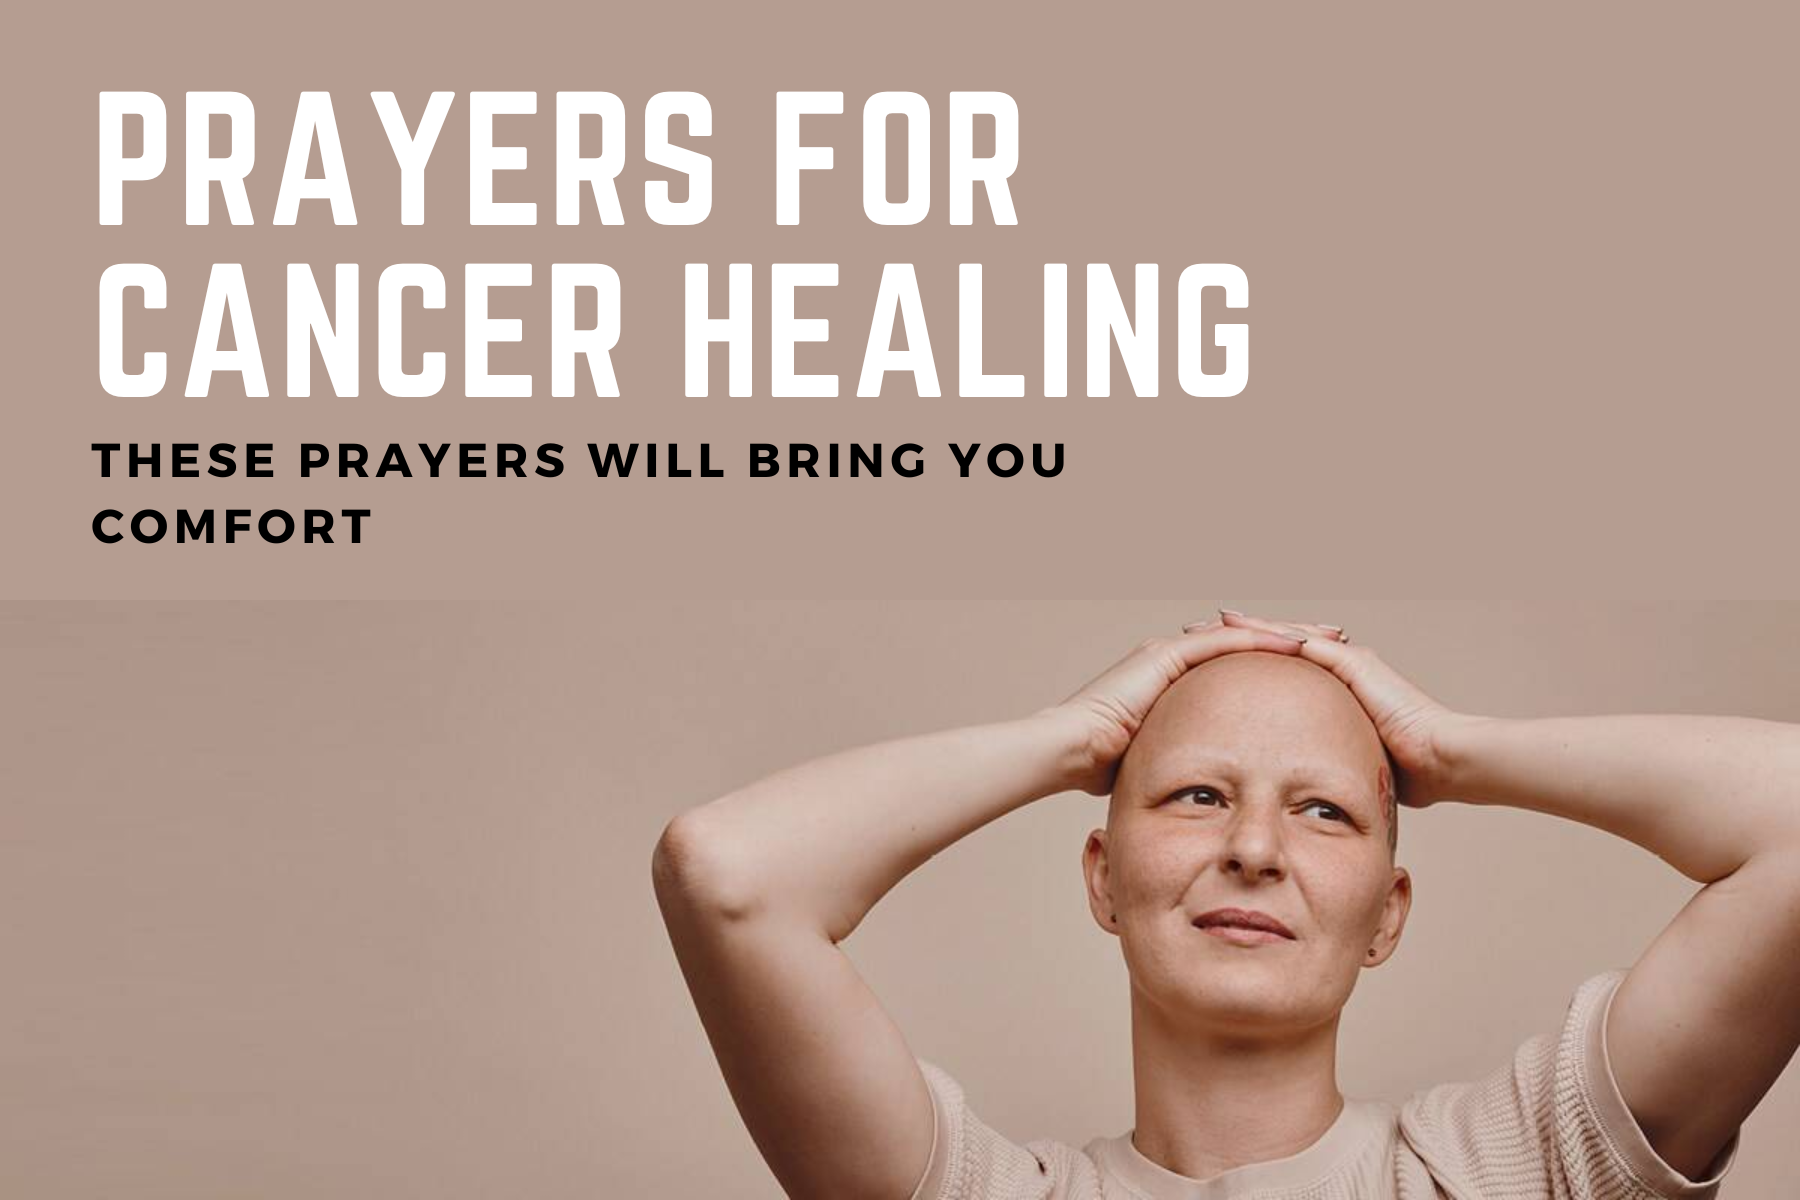 Prayers For Cancer Healing - These Prayers Will Bring You Comfort